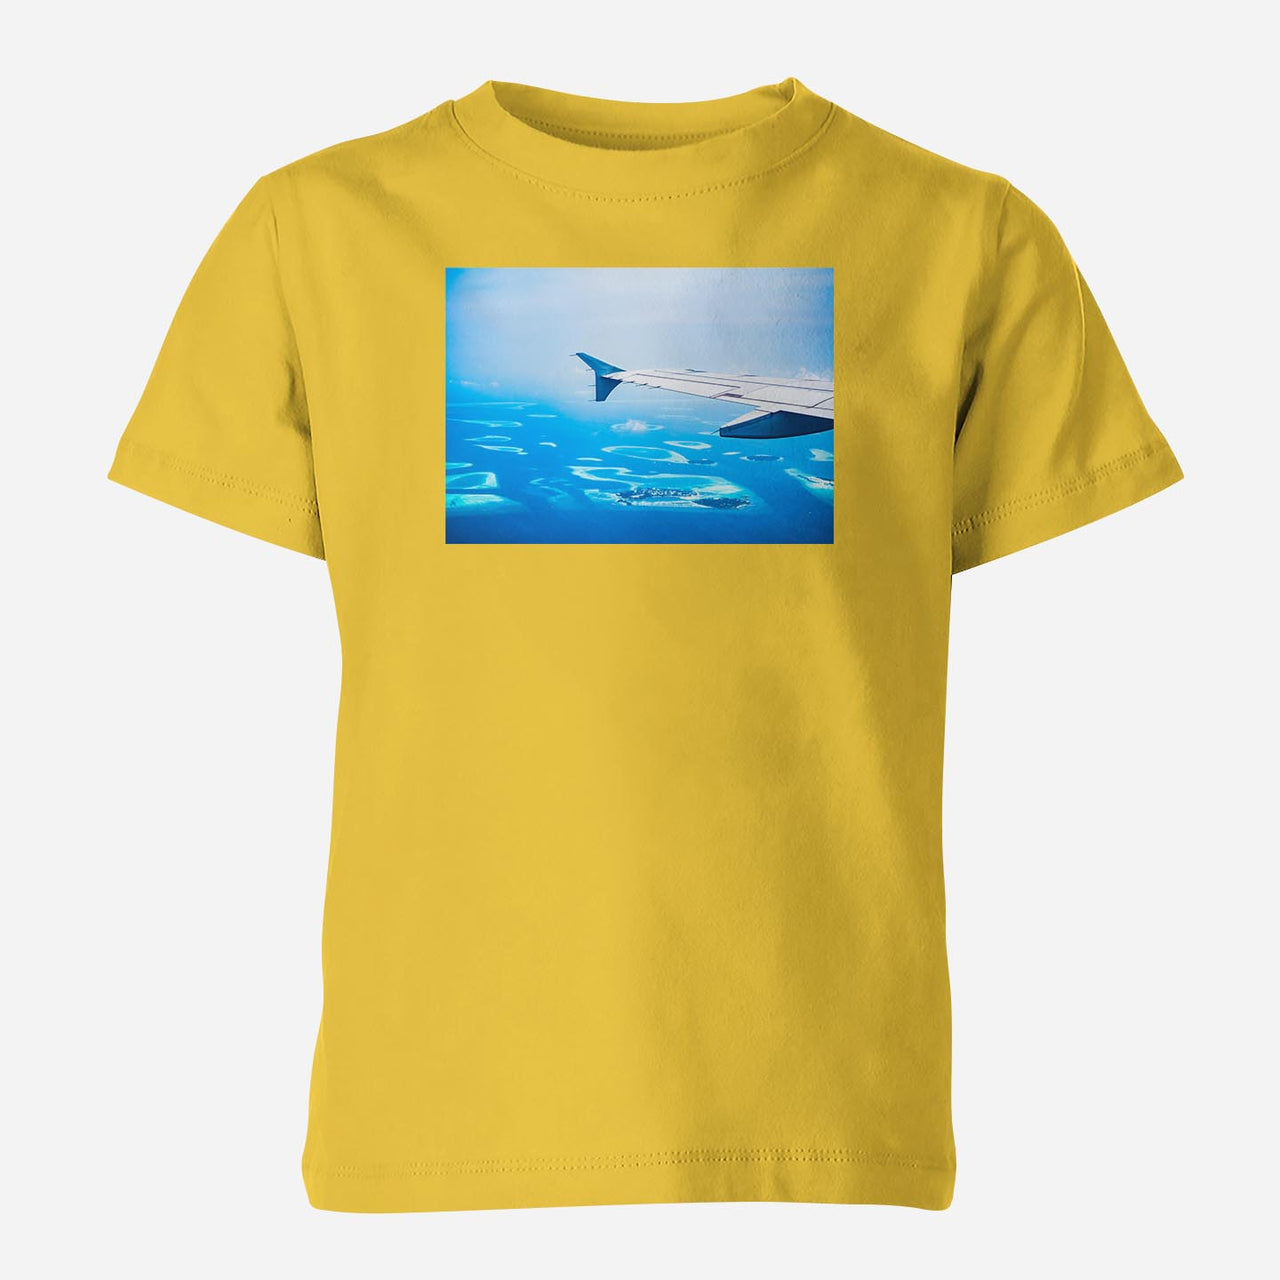 Outstanding View Through Airplane Wing Designed Children T-Shirts